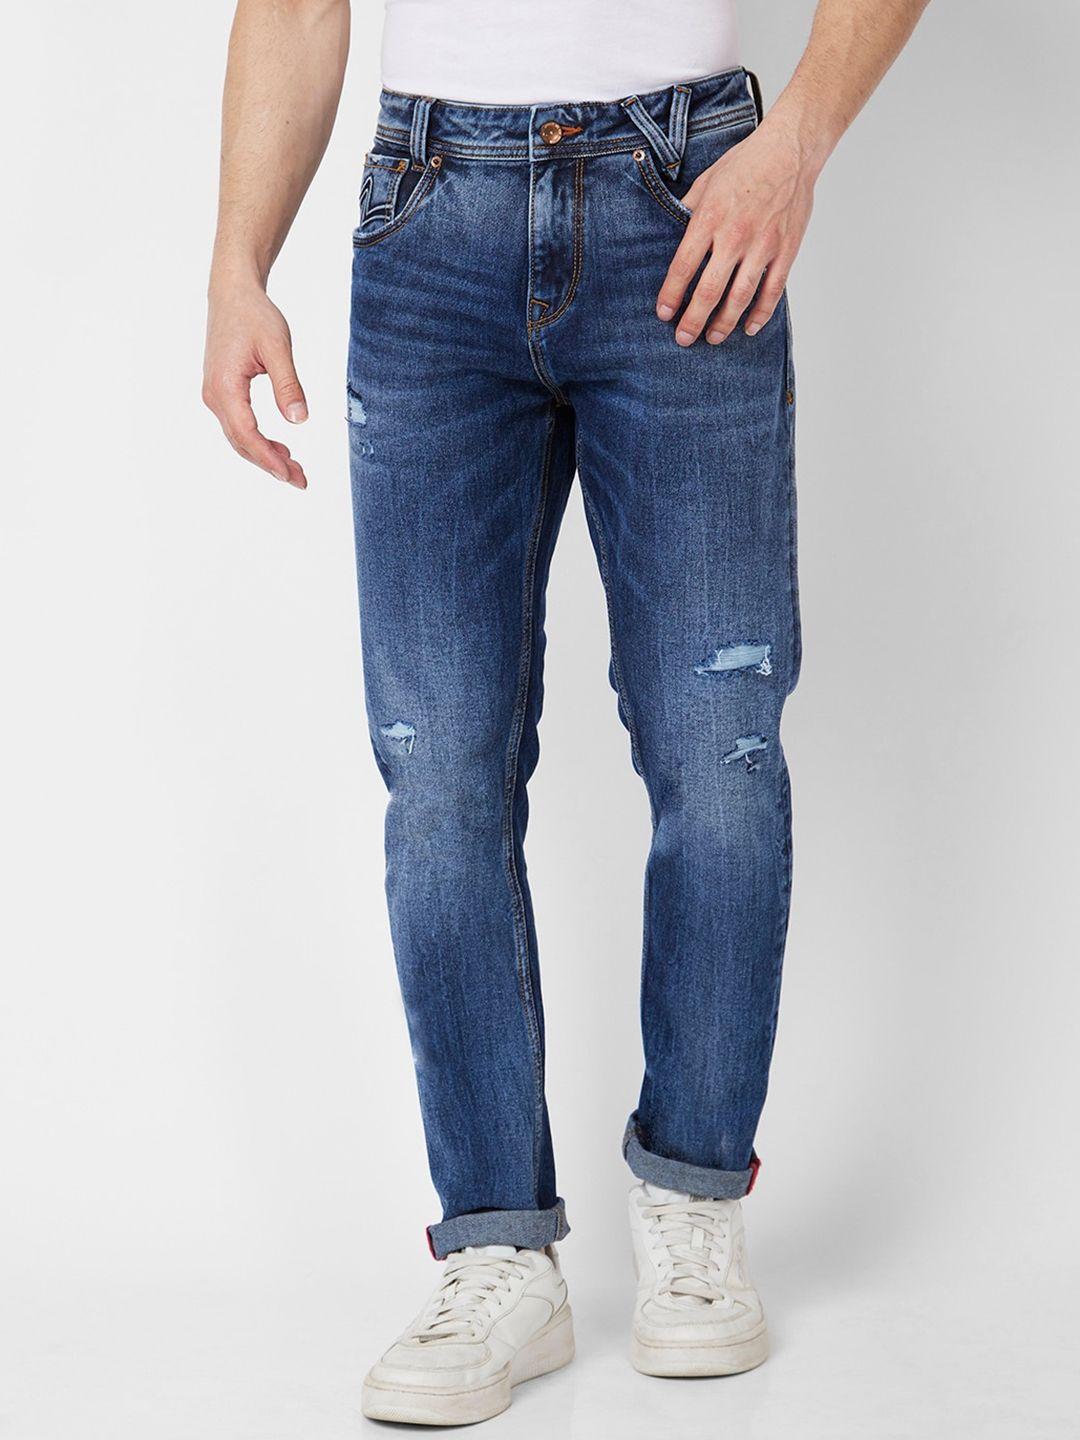 spykar-men-skinny-fit-mid-rise-mildly-distressed-heavy-fade-stretchable-jeans